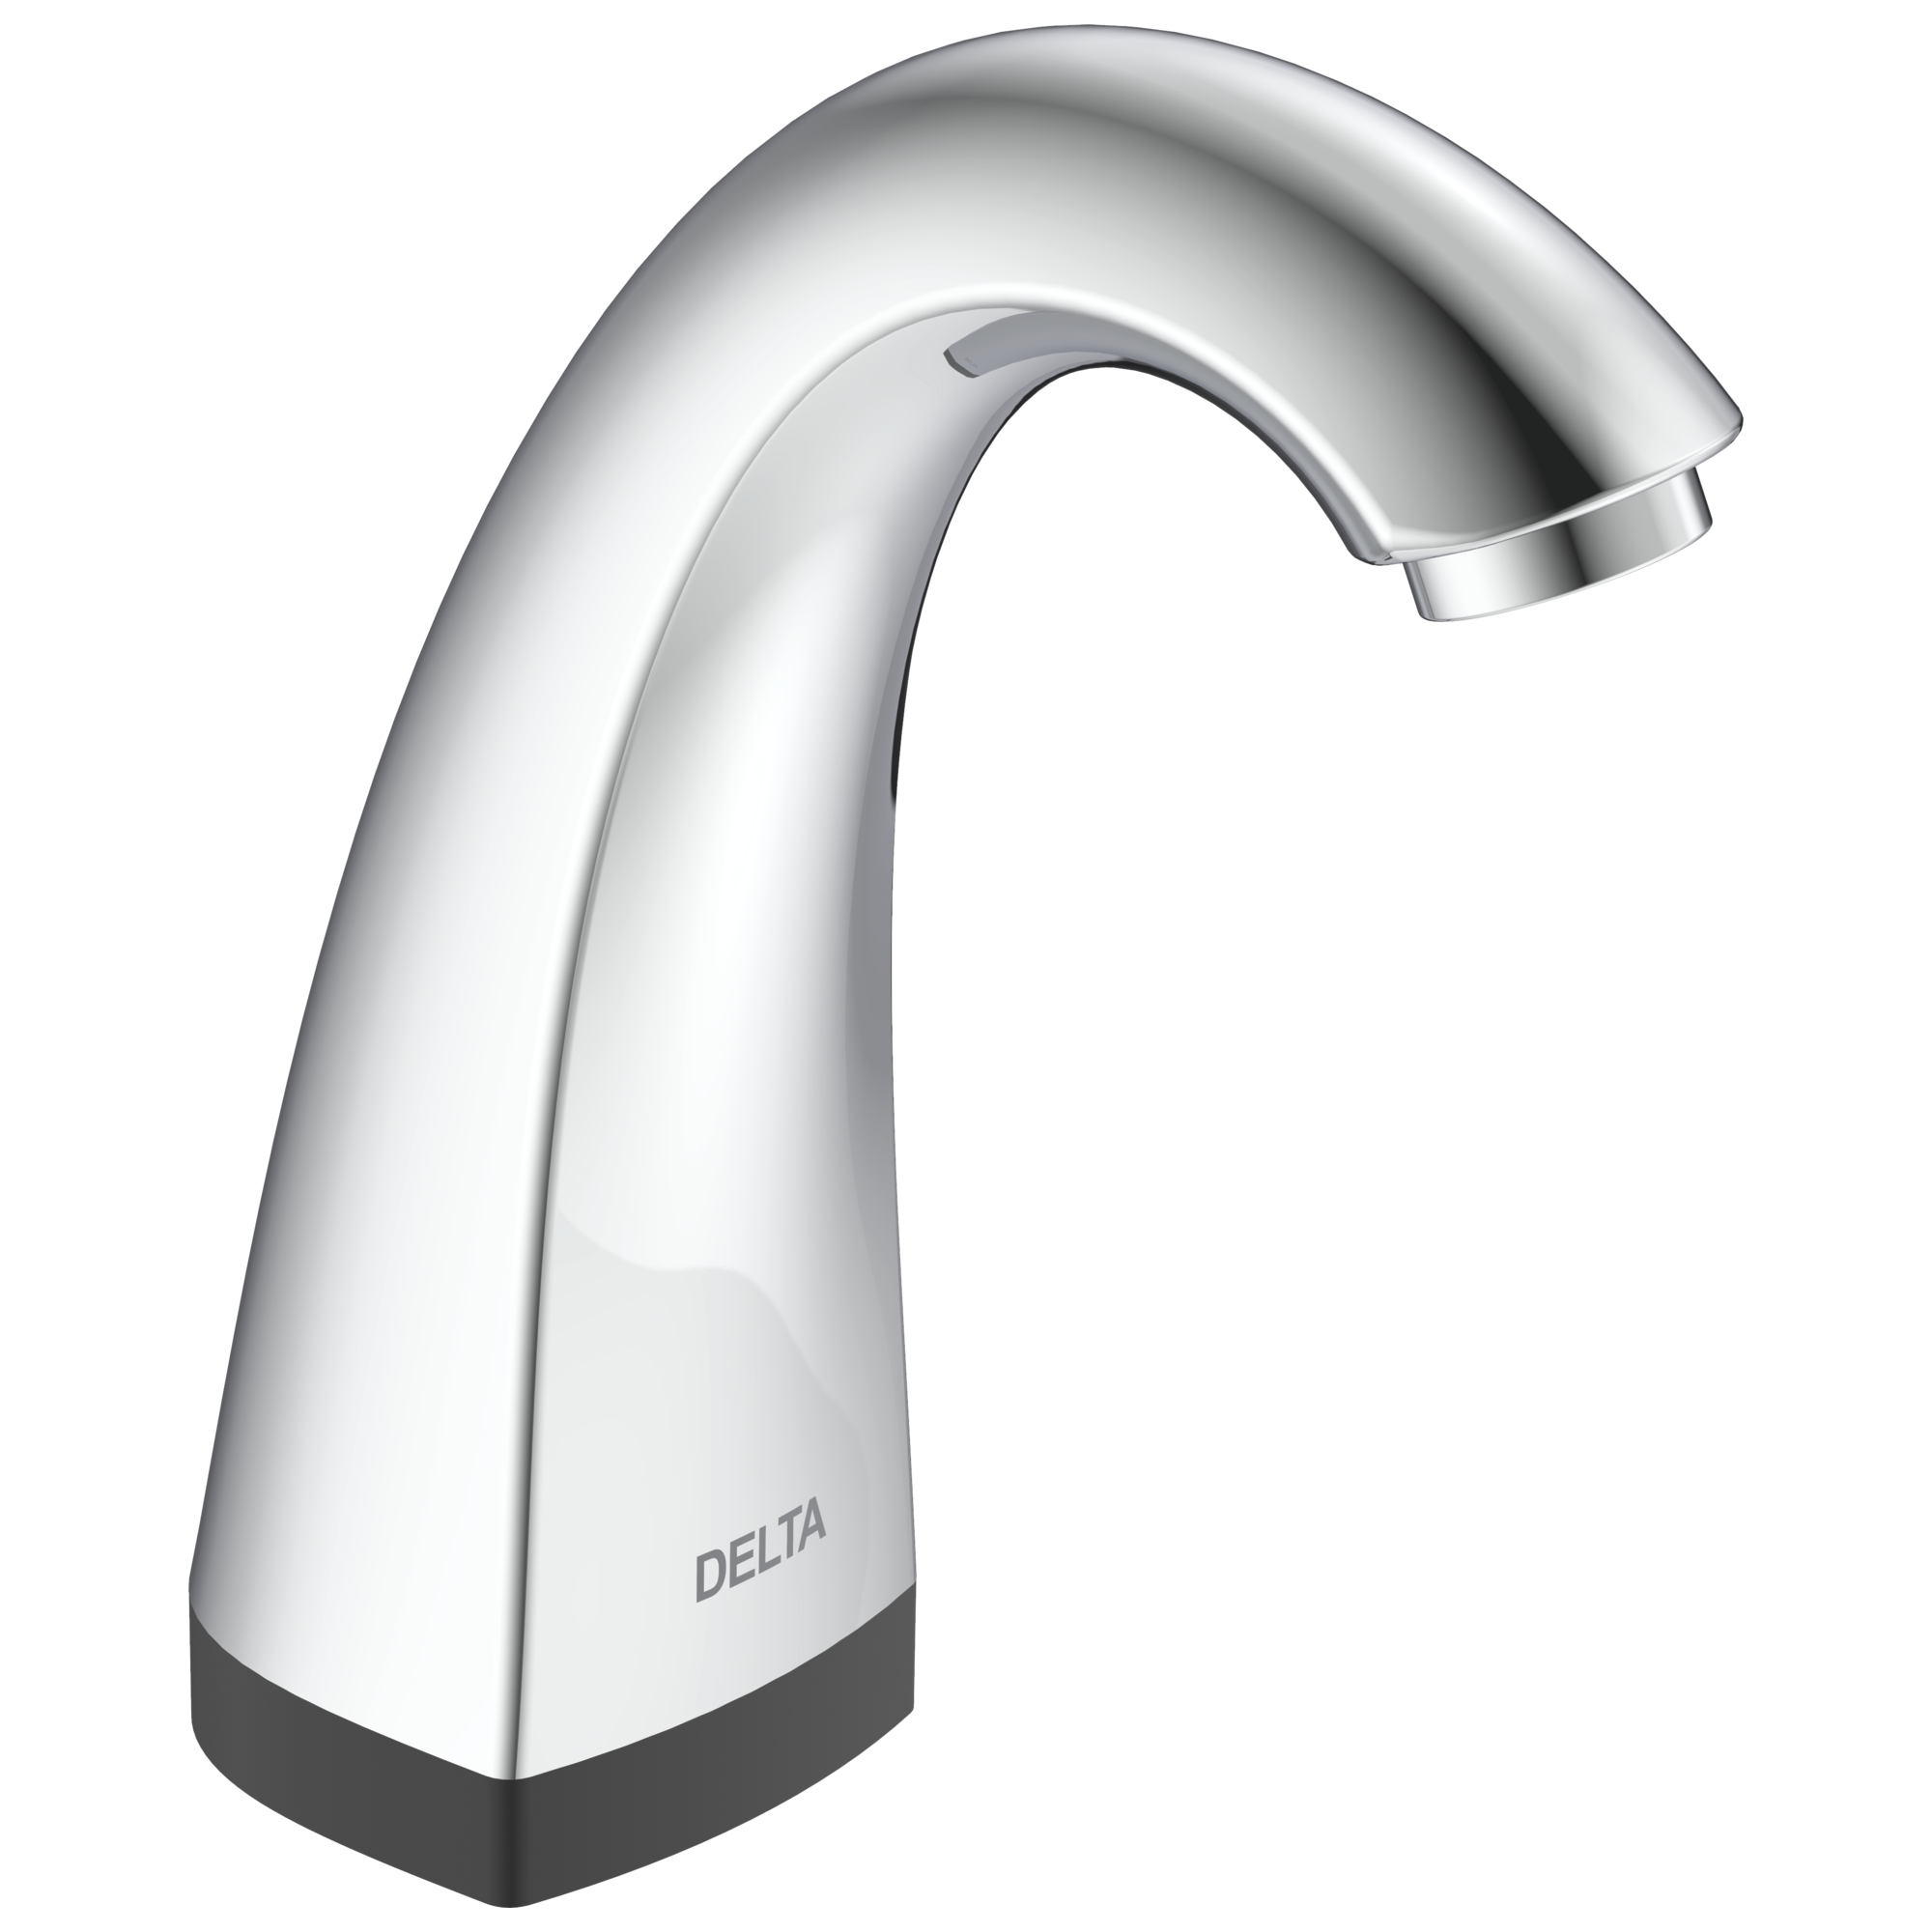 Commercial 590TP: Electronic Lavatory Faucet with Proximity® Sensing Technology - Less Power